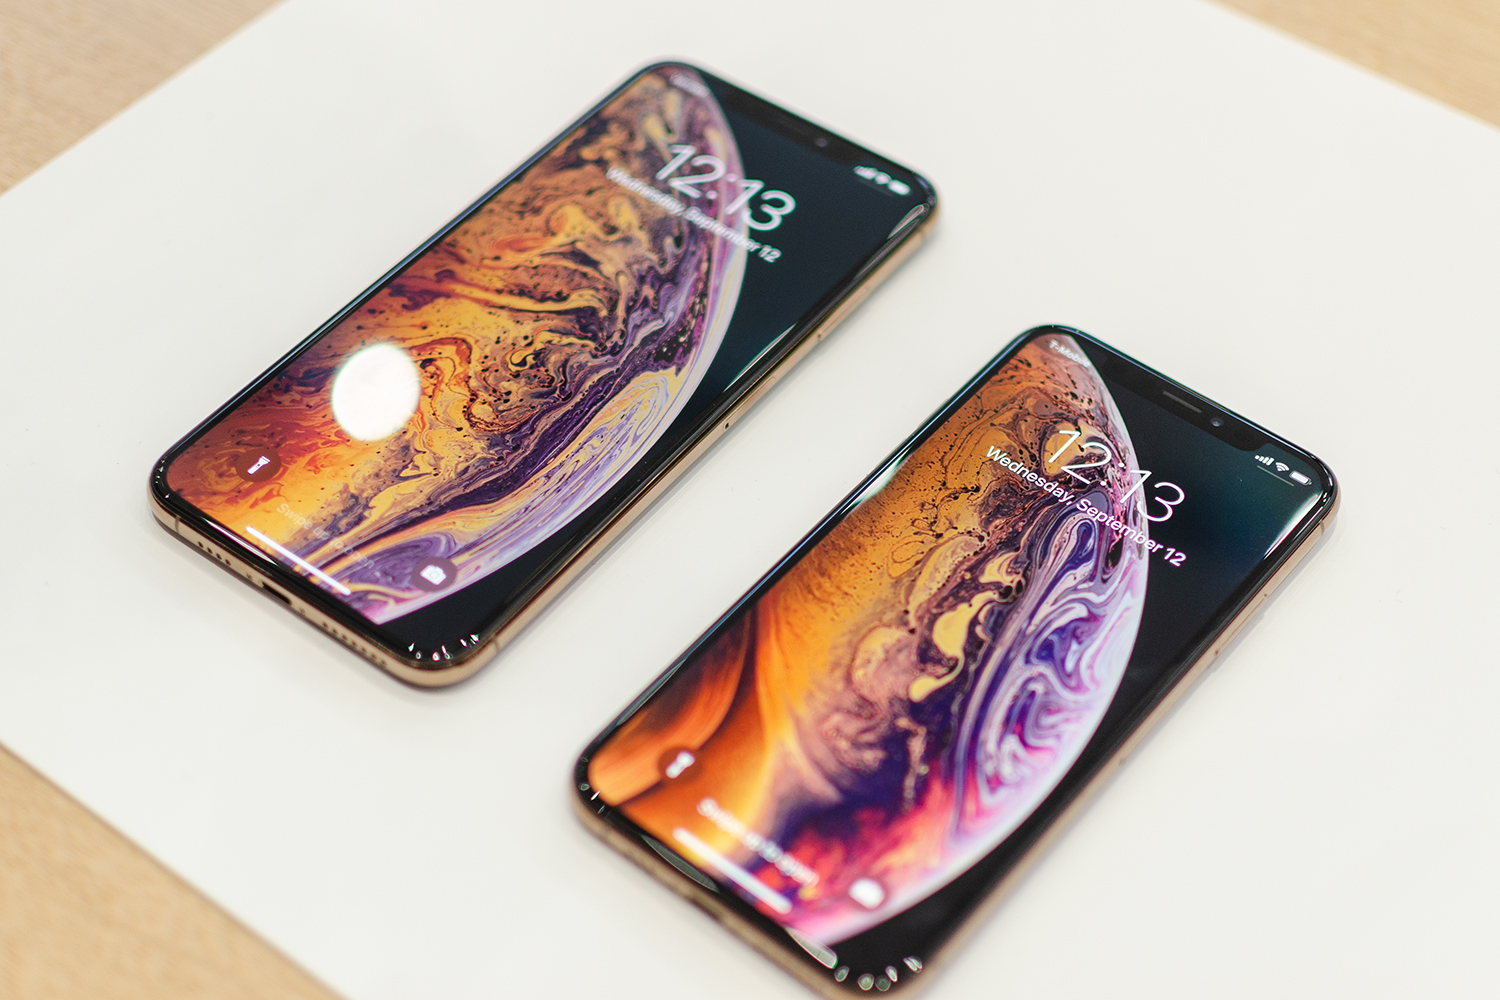 iphone xs max and xr photo galleries apple hands on 10